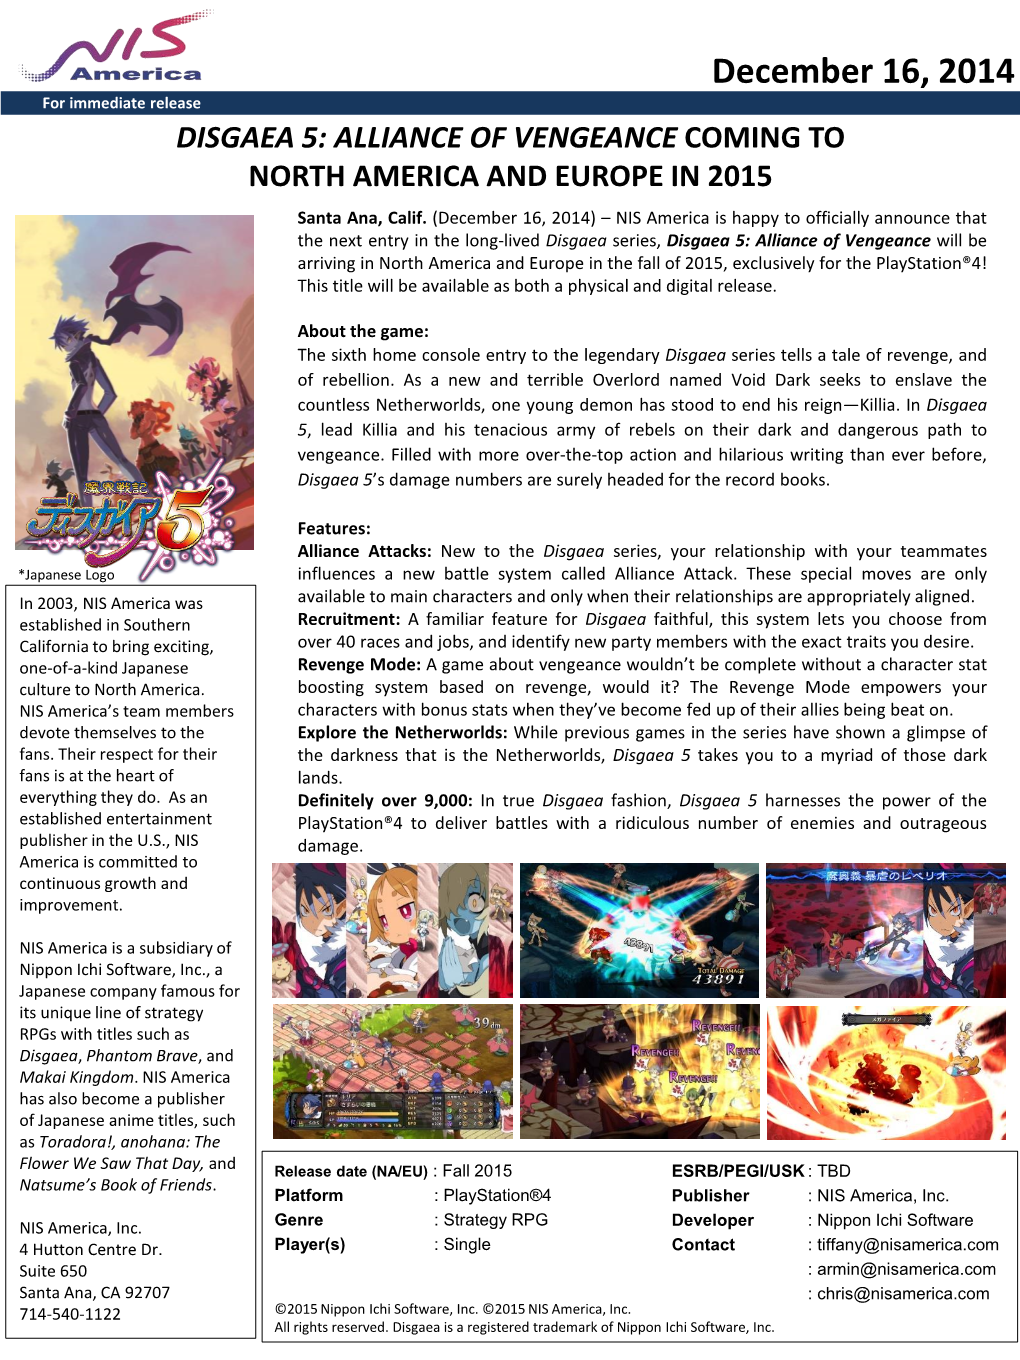 December 16, 2014 for Immediate Release DISGAEA 5: ALLIANCE of VENGEANCE COMING to NORTH AMERICA and EUROPE in 2015 Santa Ana, Calif